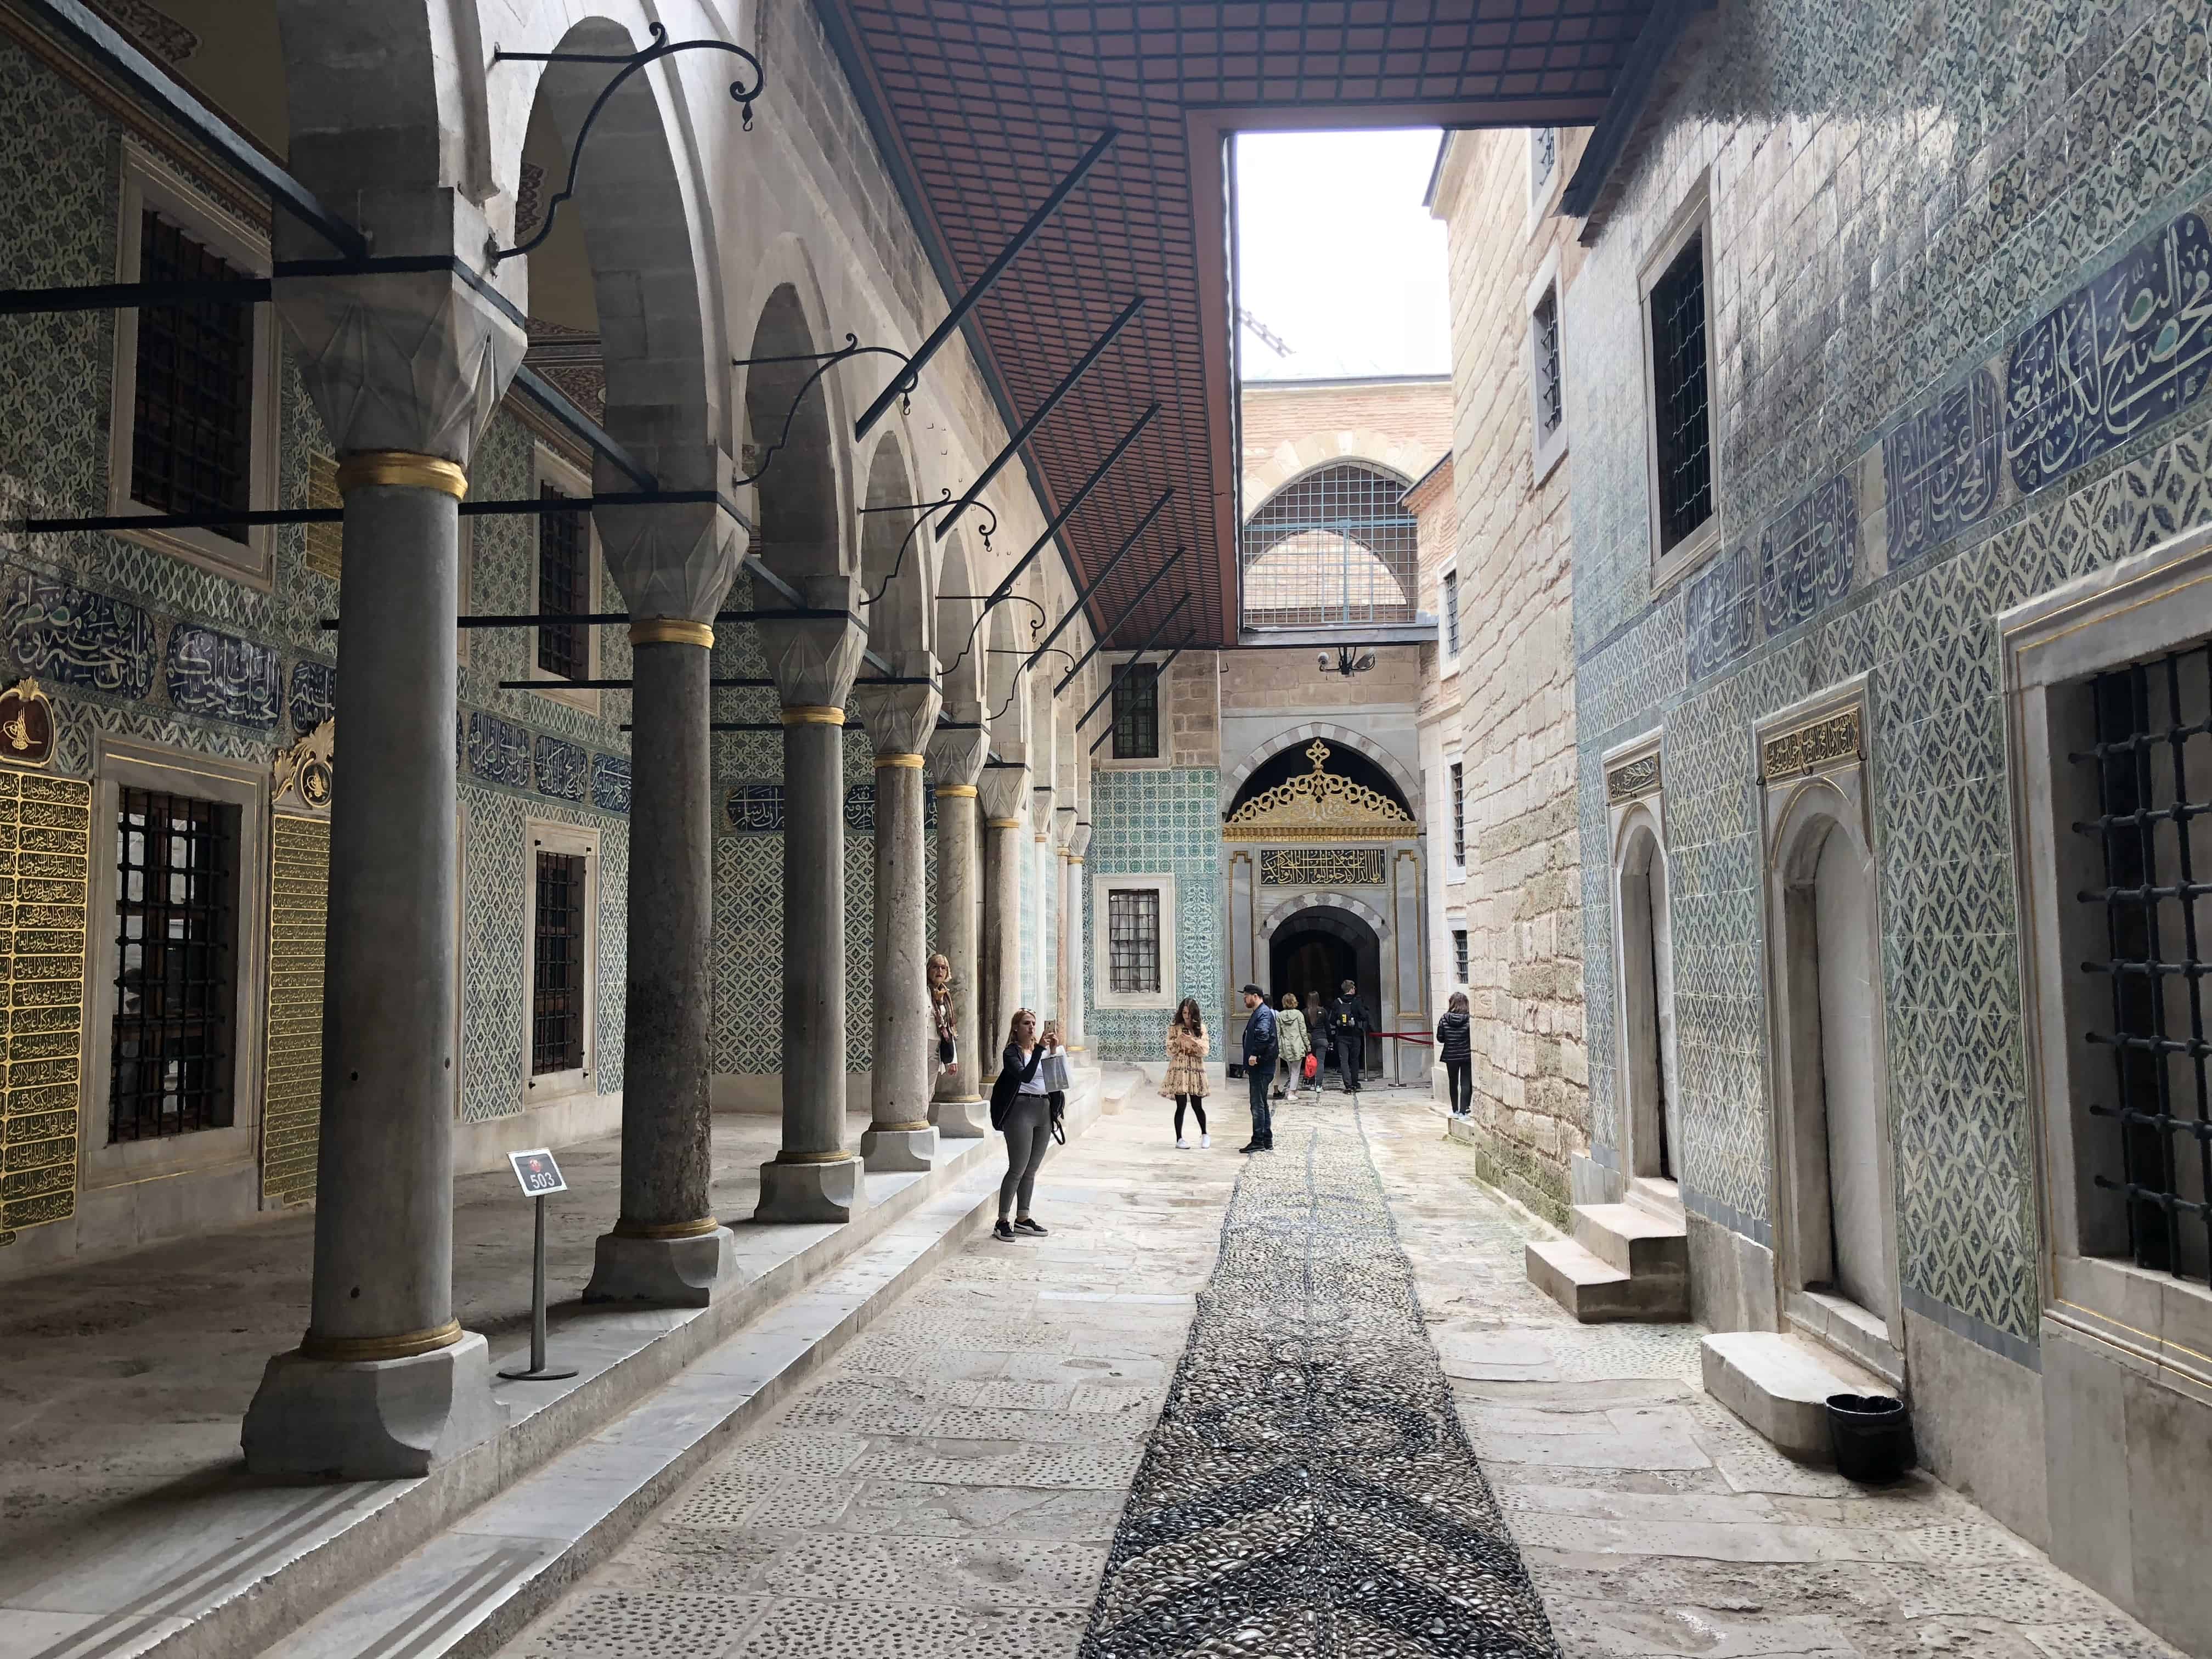 Courtyard of the Black Eunuchs in the Imperial Harem at Topkapi Palace in Istanbul, Turkey